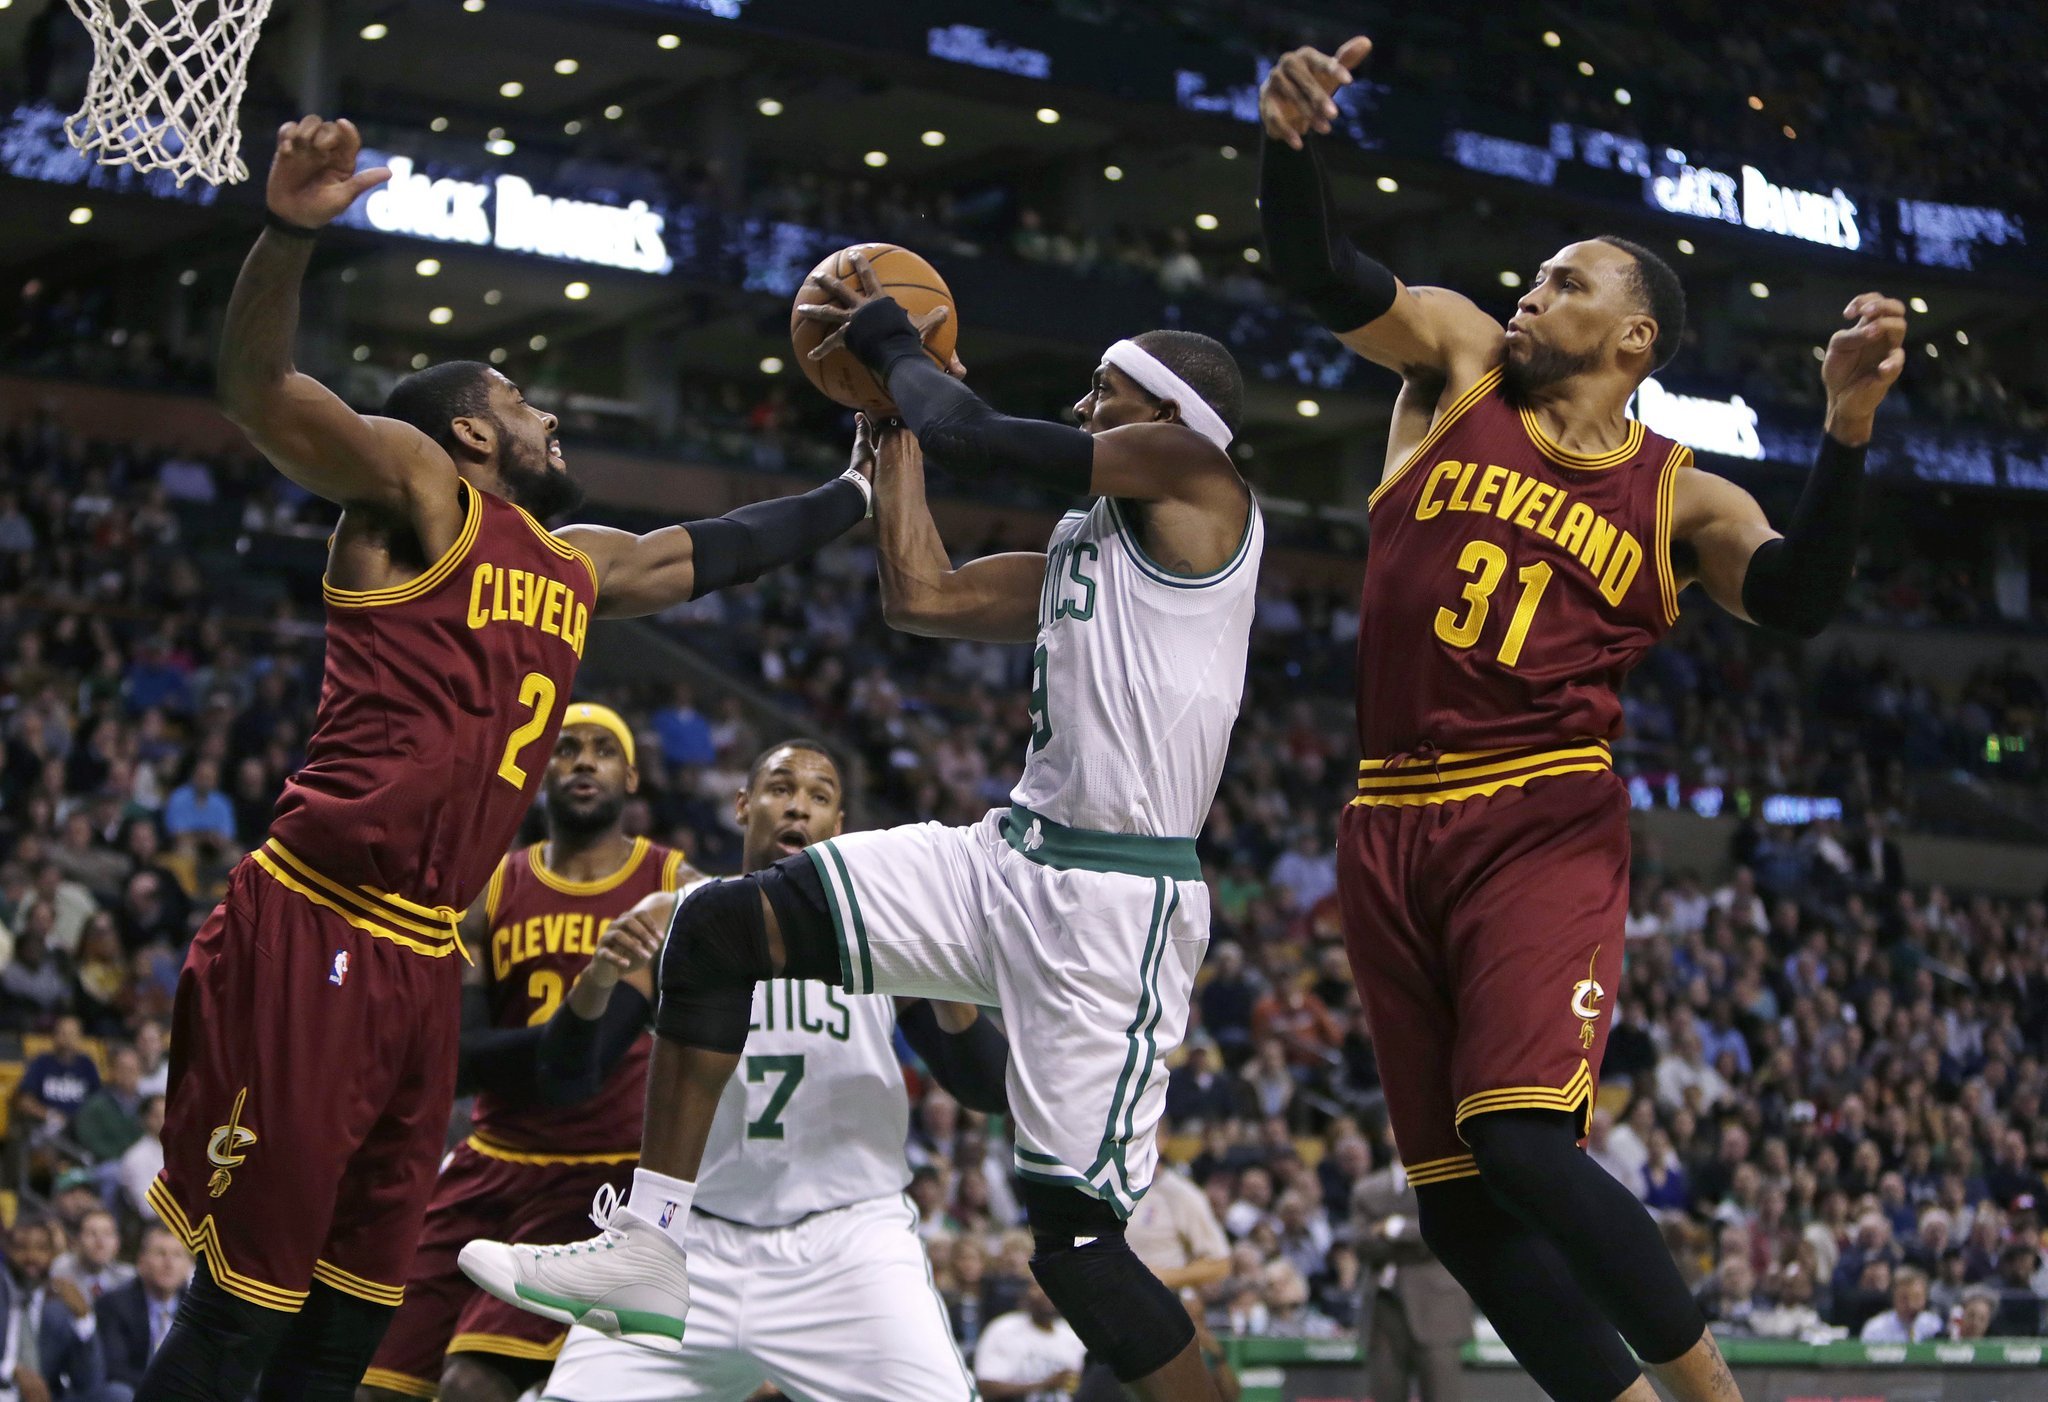 Cleveland Cavaliers VS Boston Celtics ( BETTING TIPS, Match Preview & Expert Analysis )™